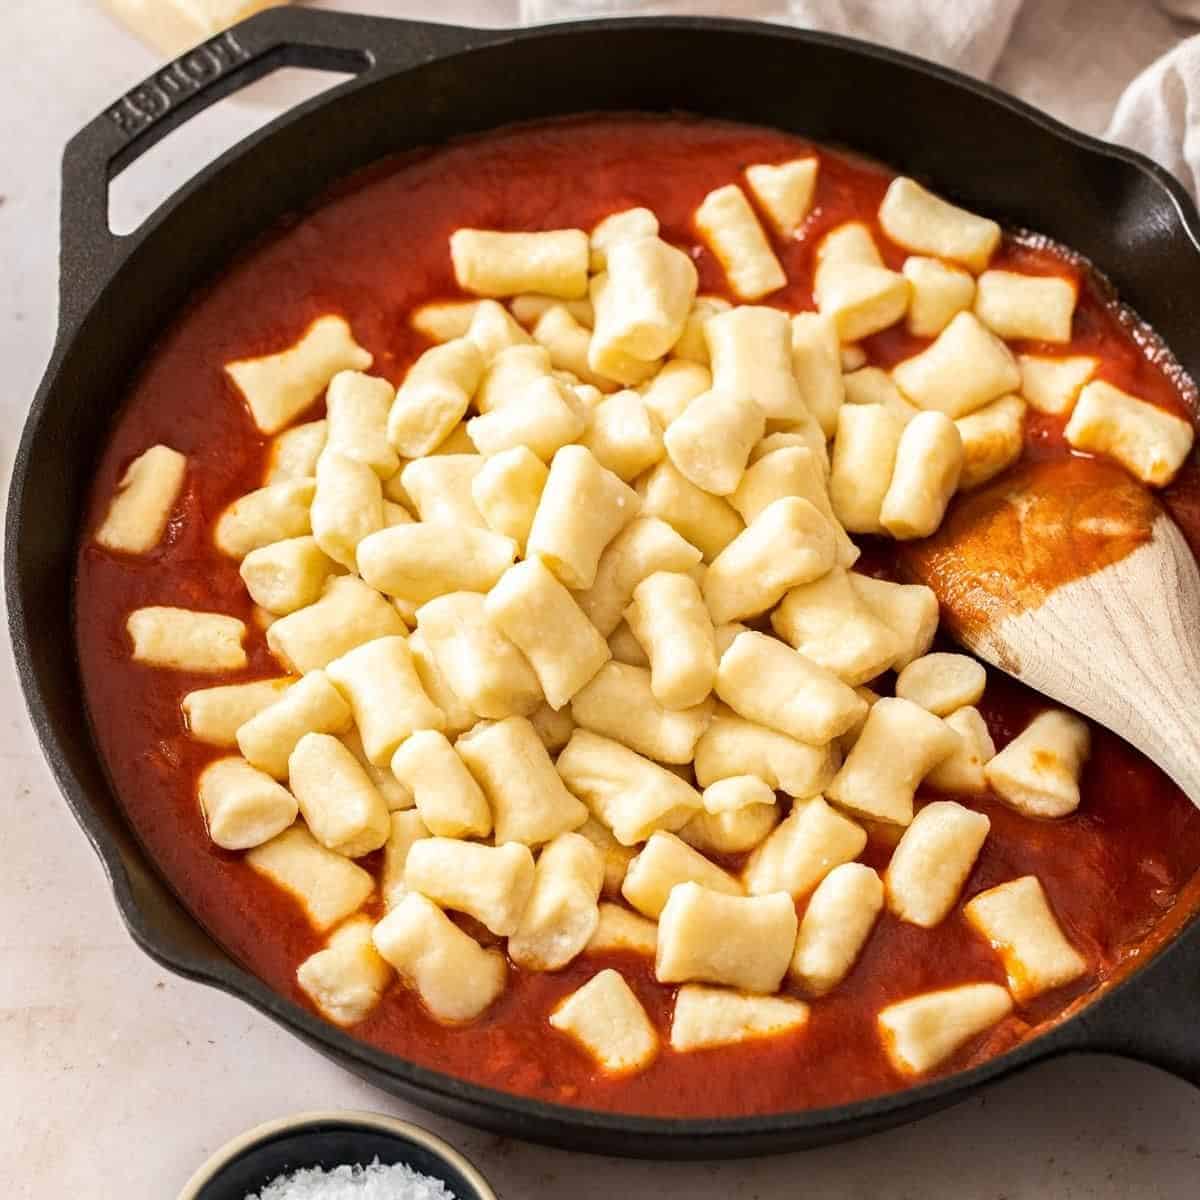 Overhead view of Gnocchi di Ricotta on top of the tomato sauce with wooden spoon.